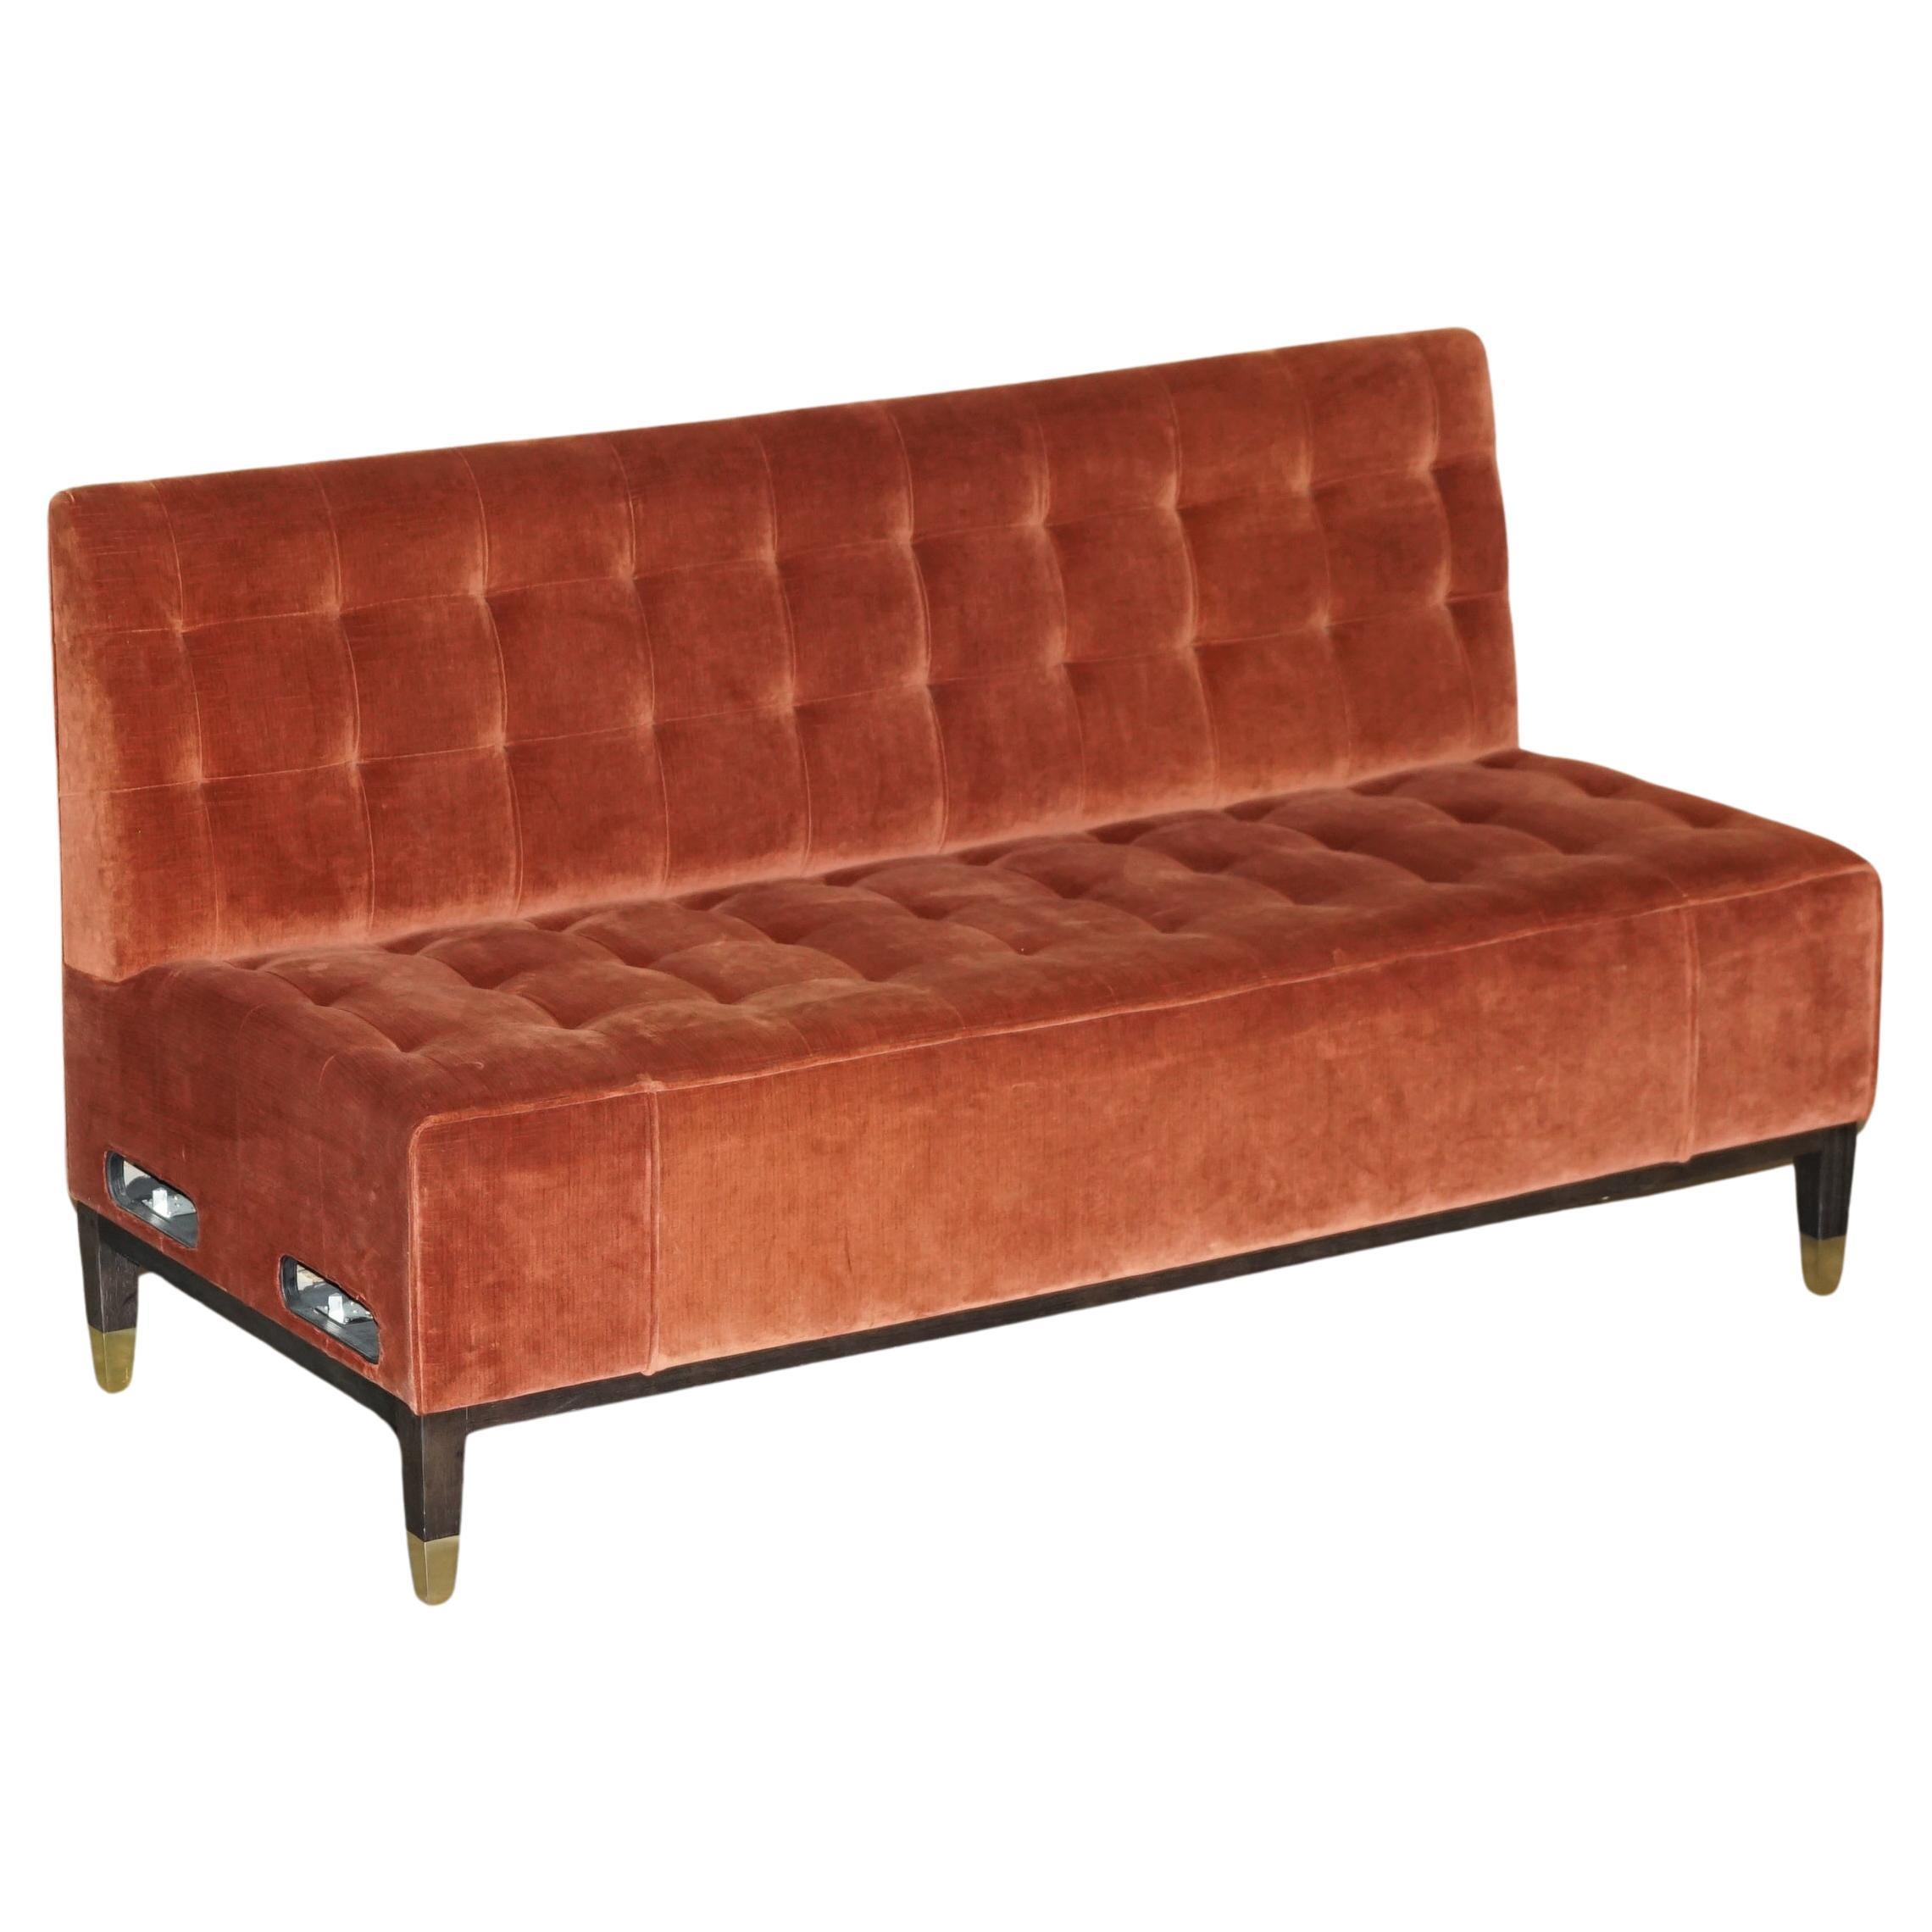 GEORGE SMITH CHELSSEA CHESTERFiELD TUFTED BENCH SOFA IN VELOUR UPHOLSTERY im Angebot